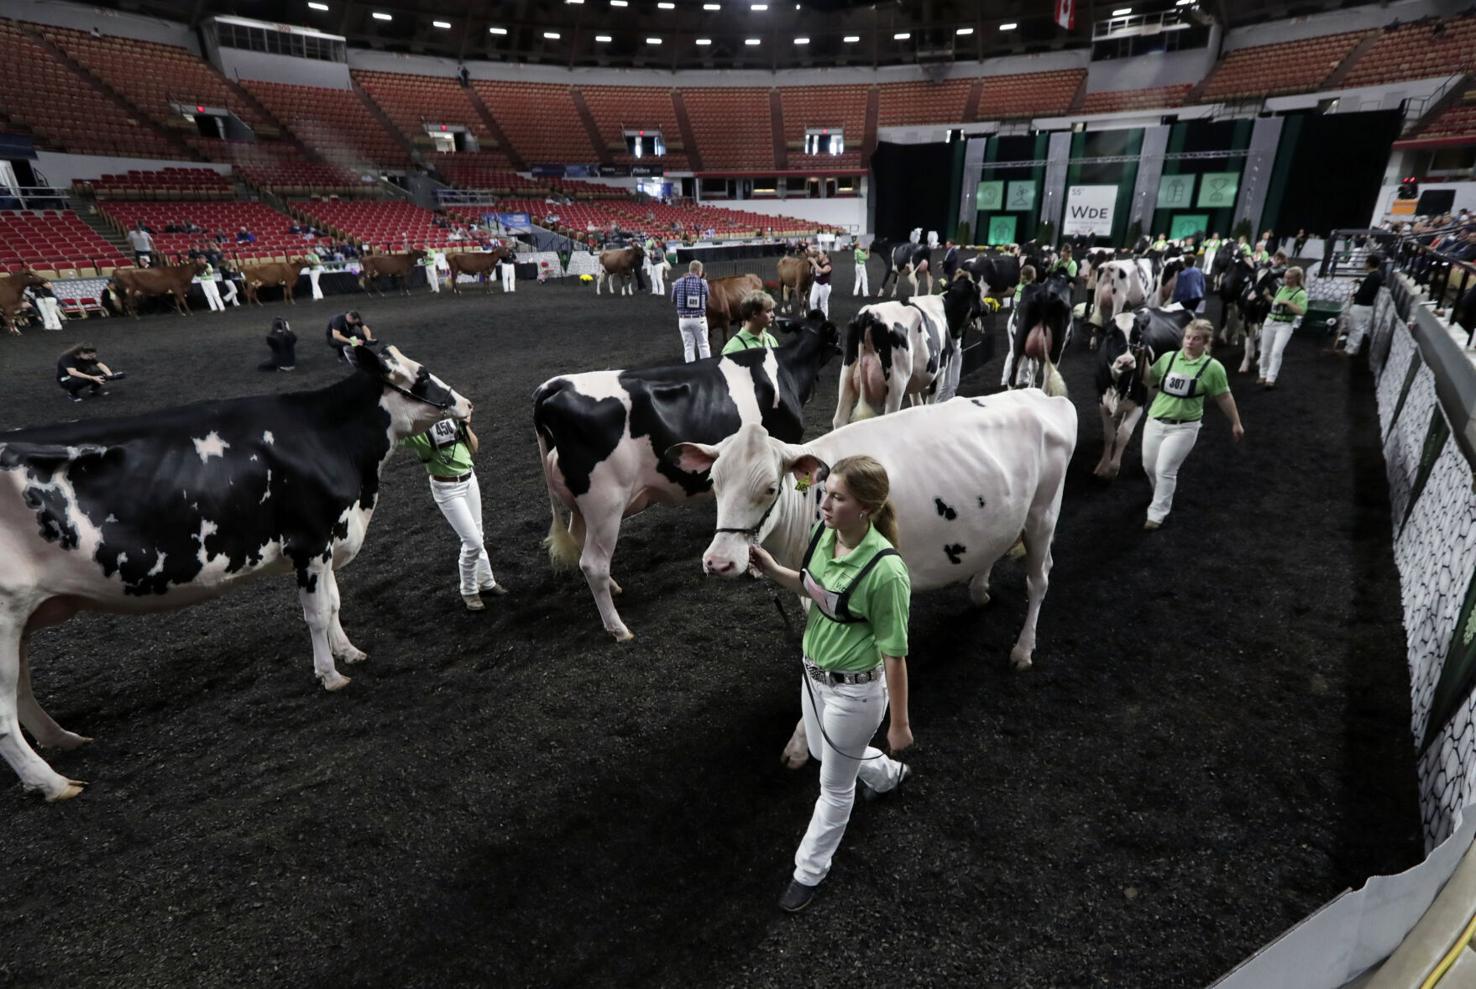 The Dane County Coliseum opened in 1967 and for over five decades has served as a show ring during World Dairy Expo.